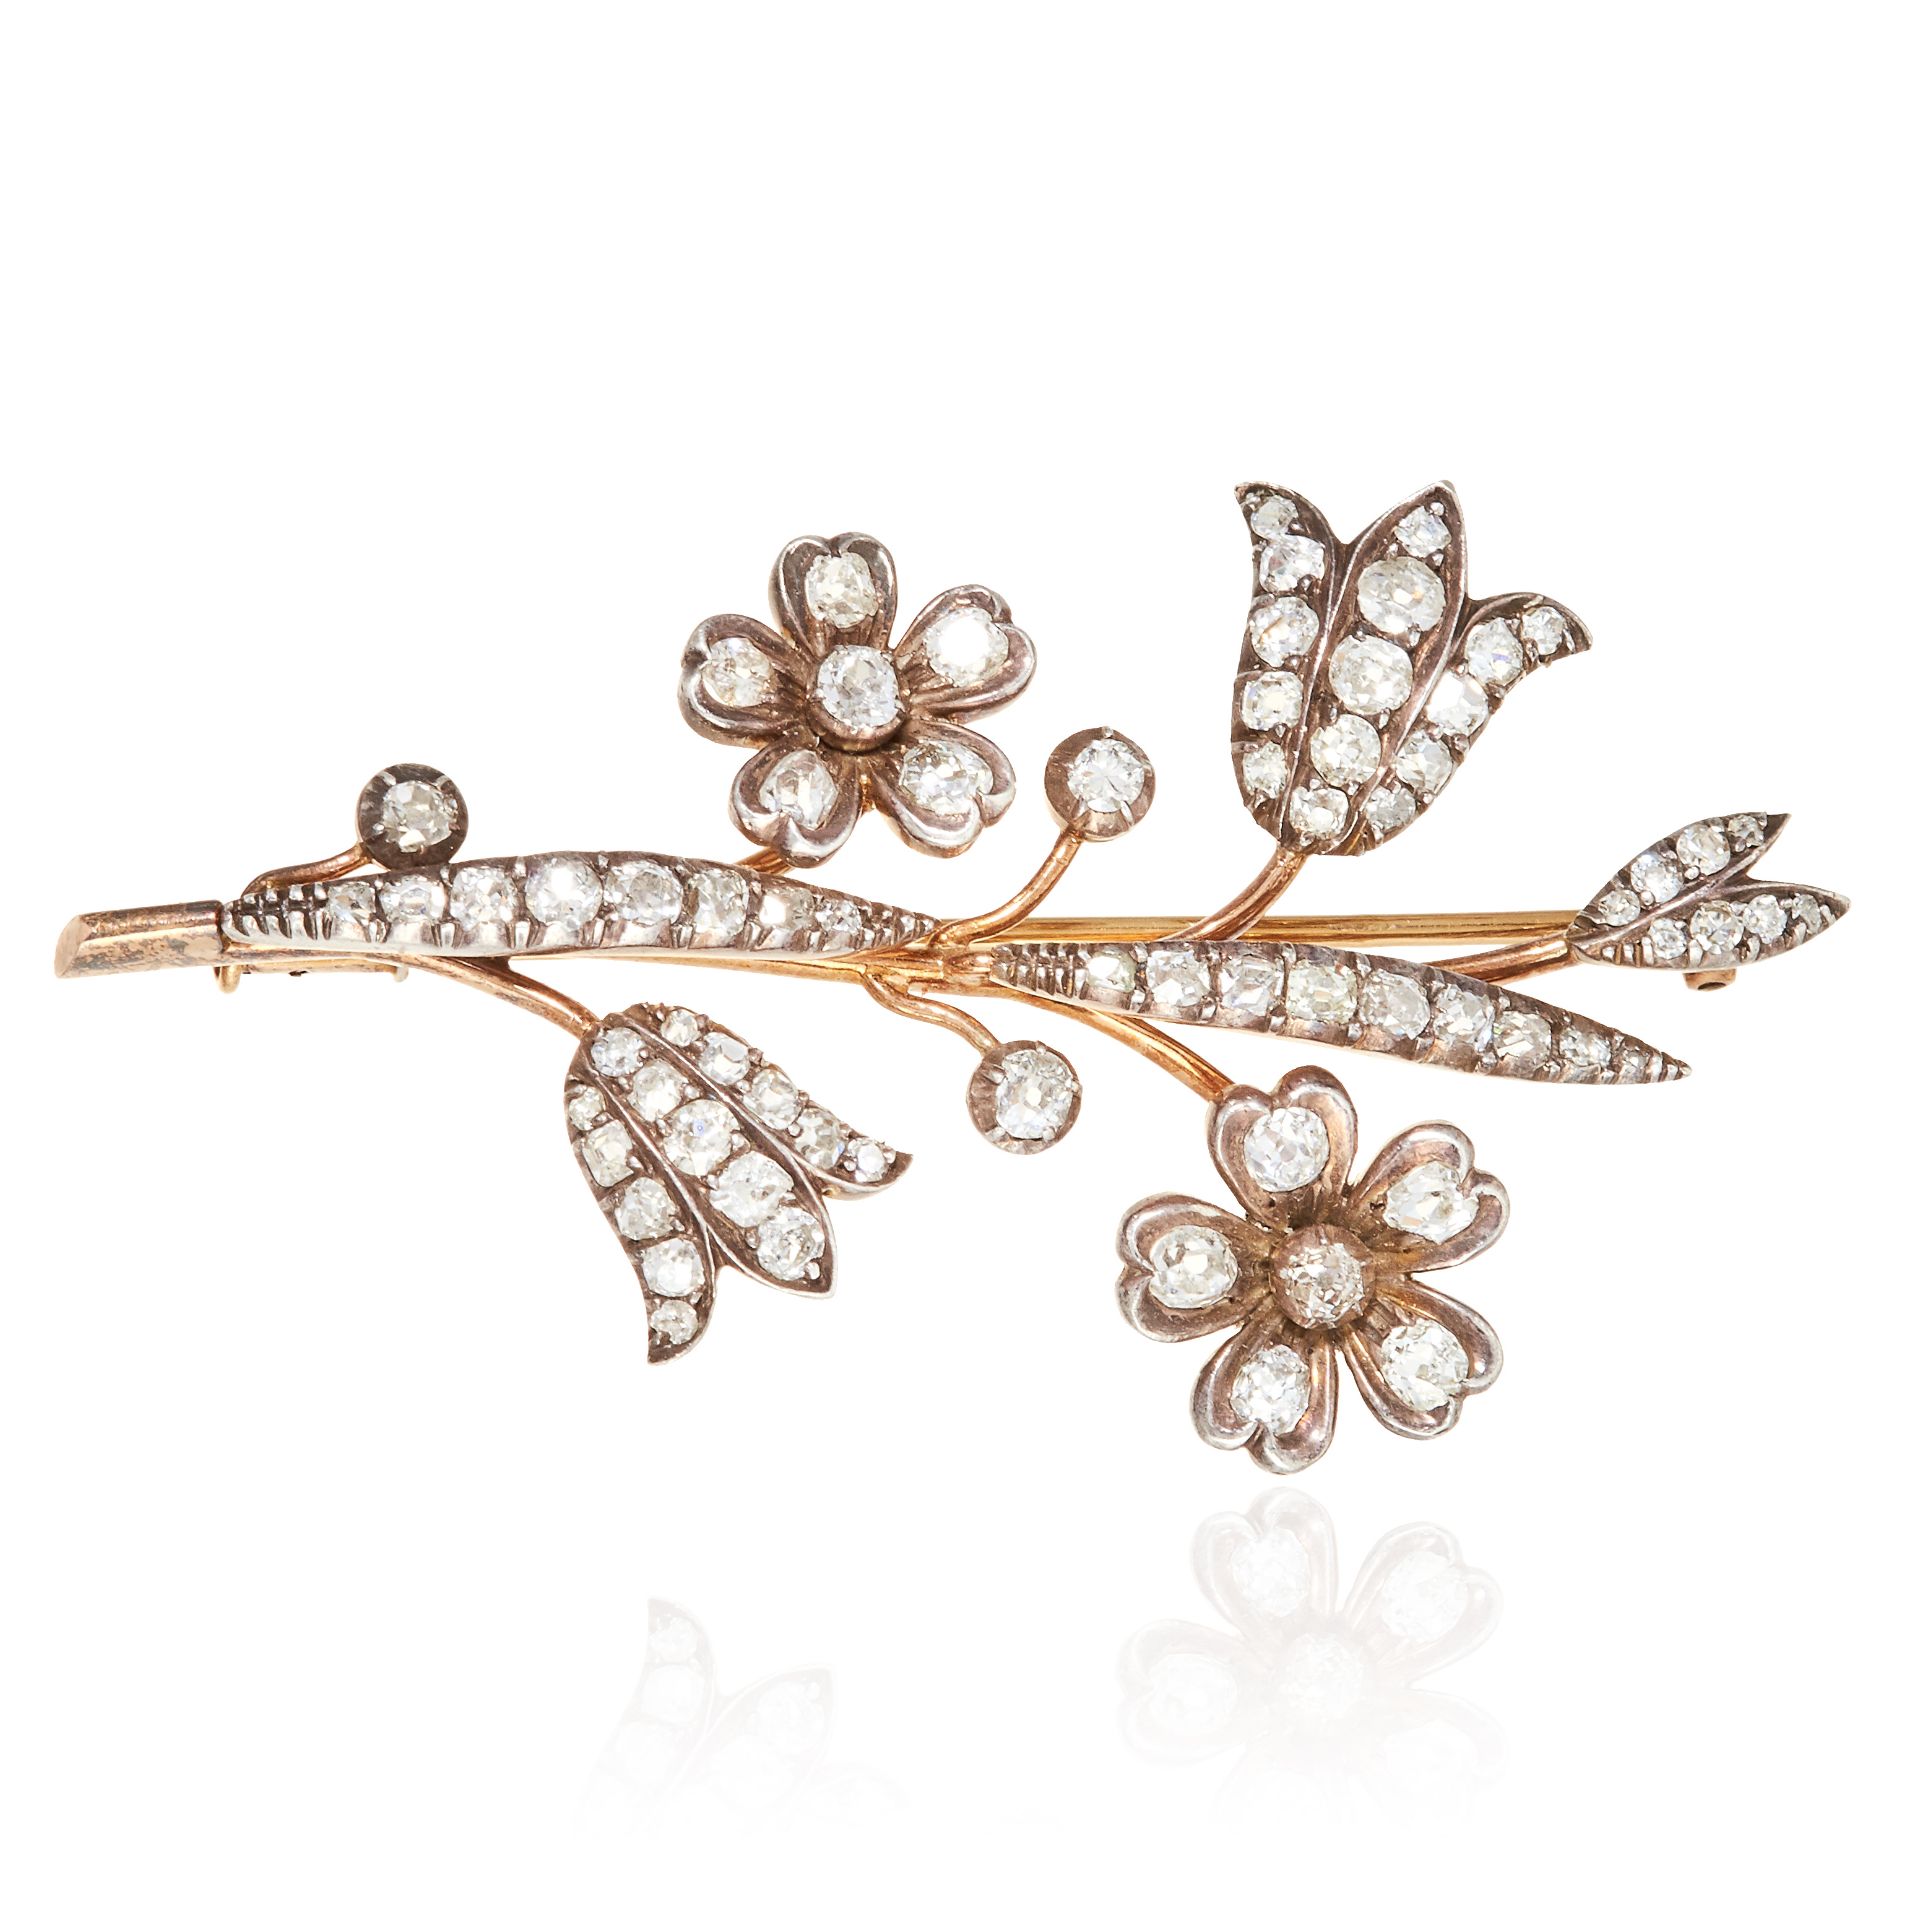 A DIAMOND FLOWER SPRAY BROOCH in gold or silver, designed as floral spray jewelled with old cut